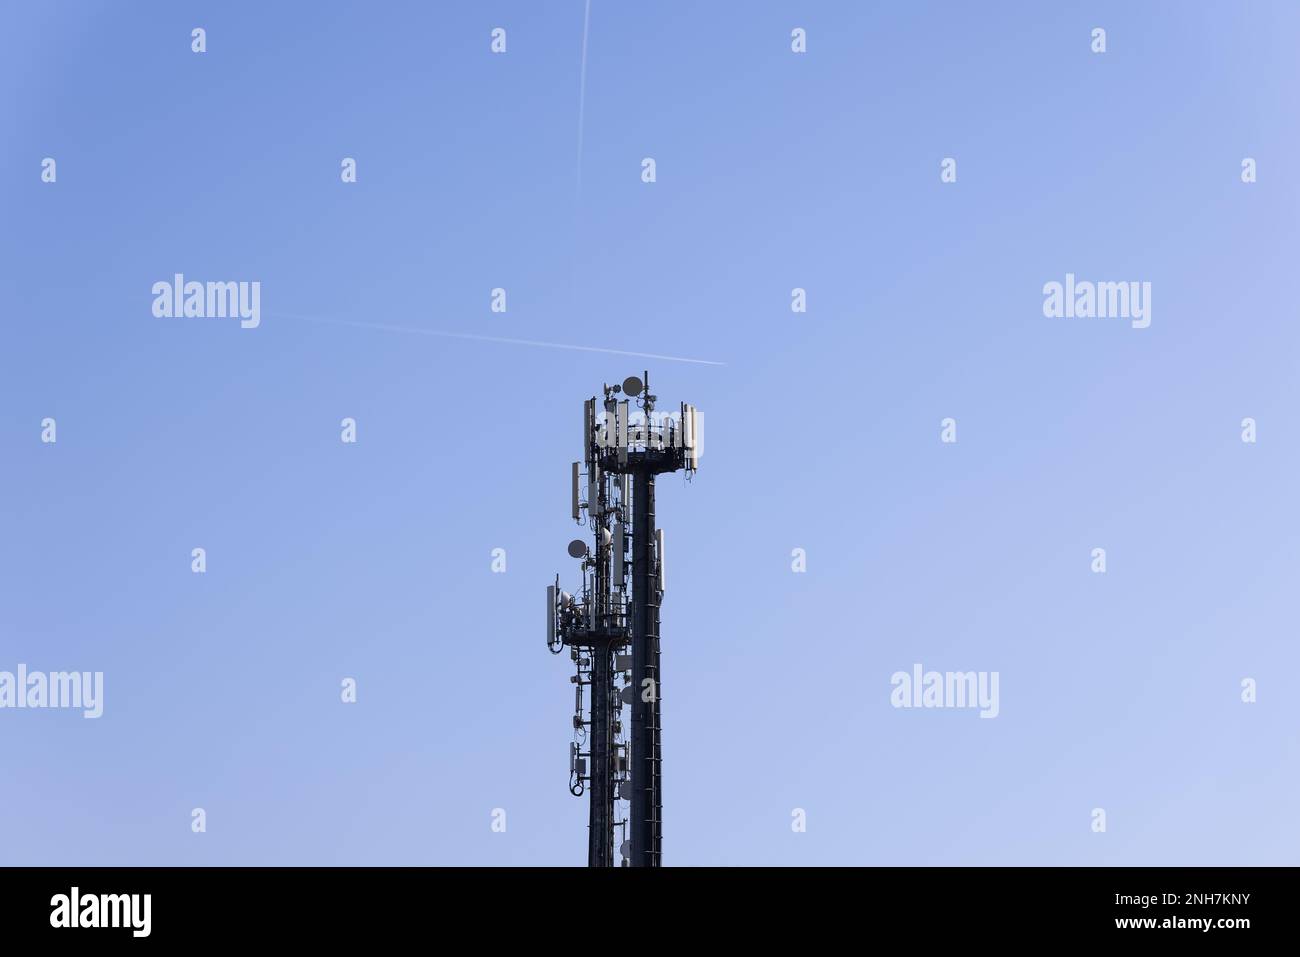 Telecommunications tower with cellular antennas and repeaters against a clear blue sky with two traces of flying aircraft Stock Photo